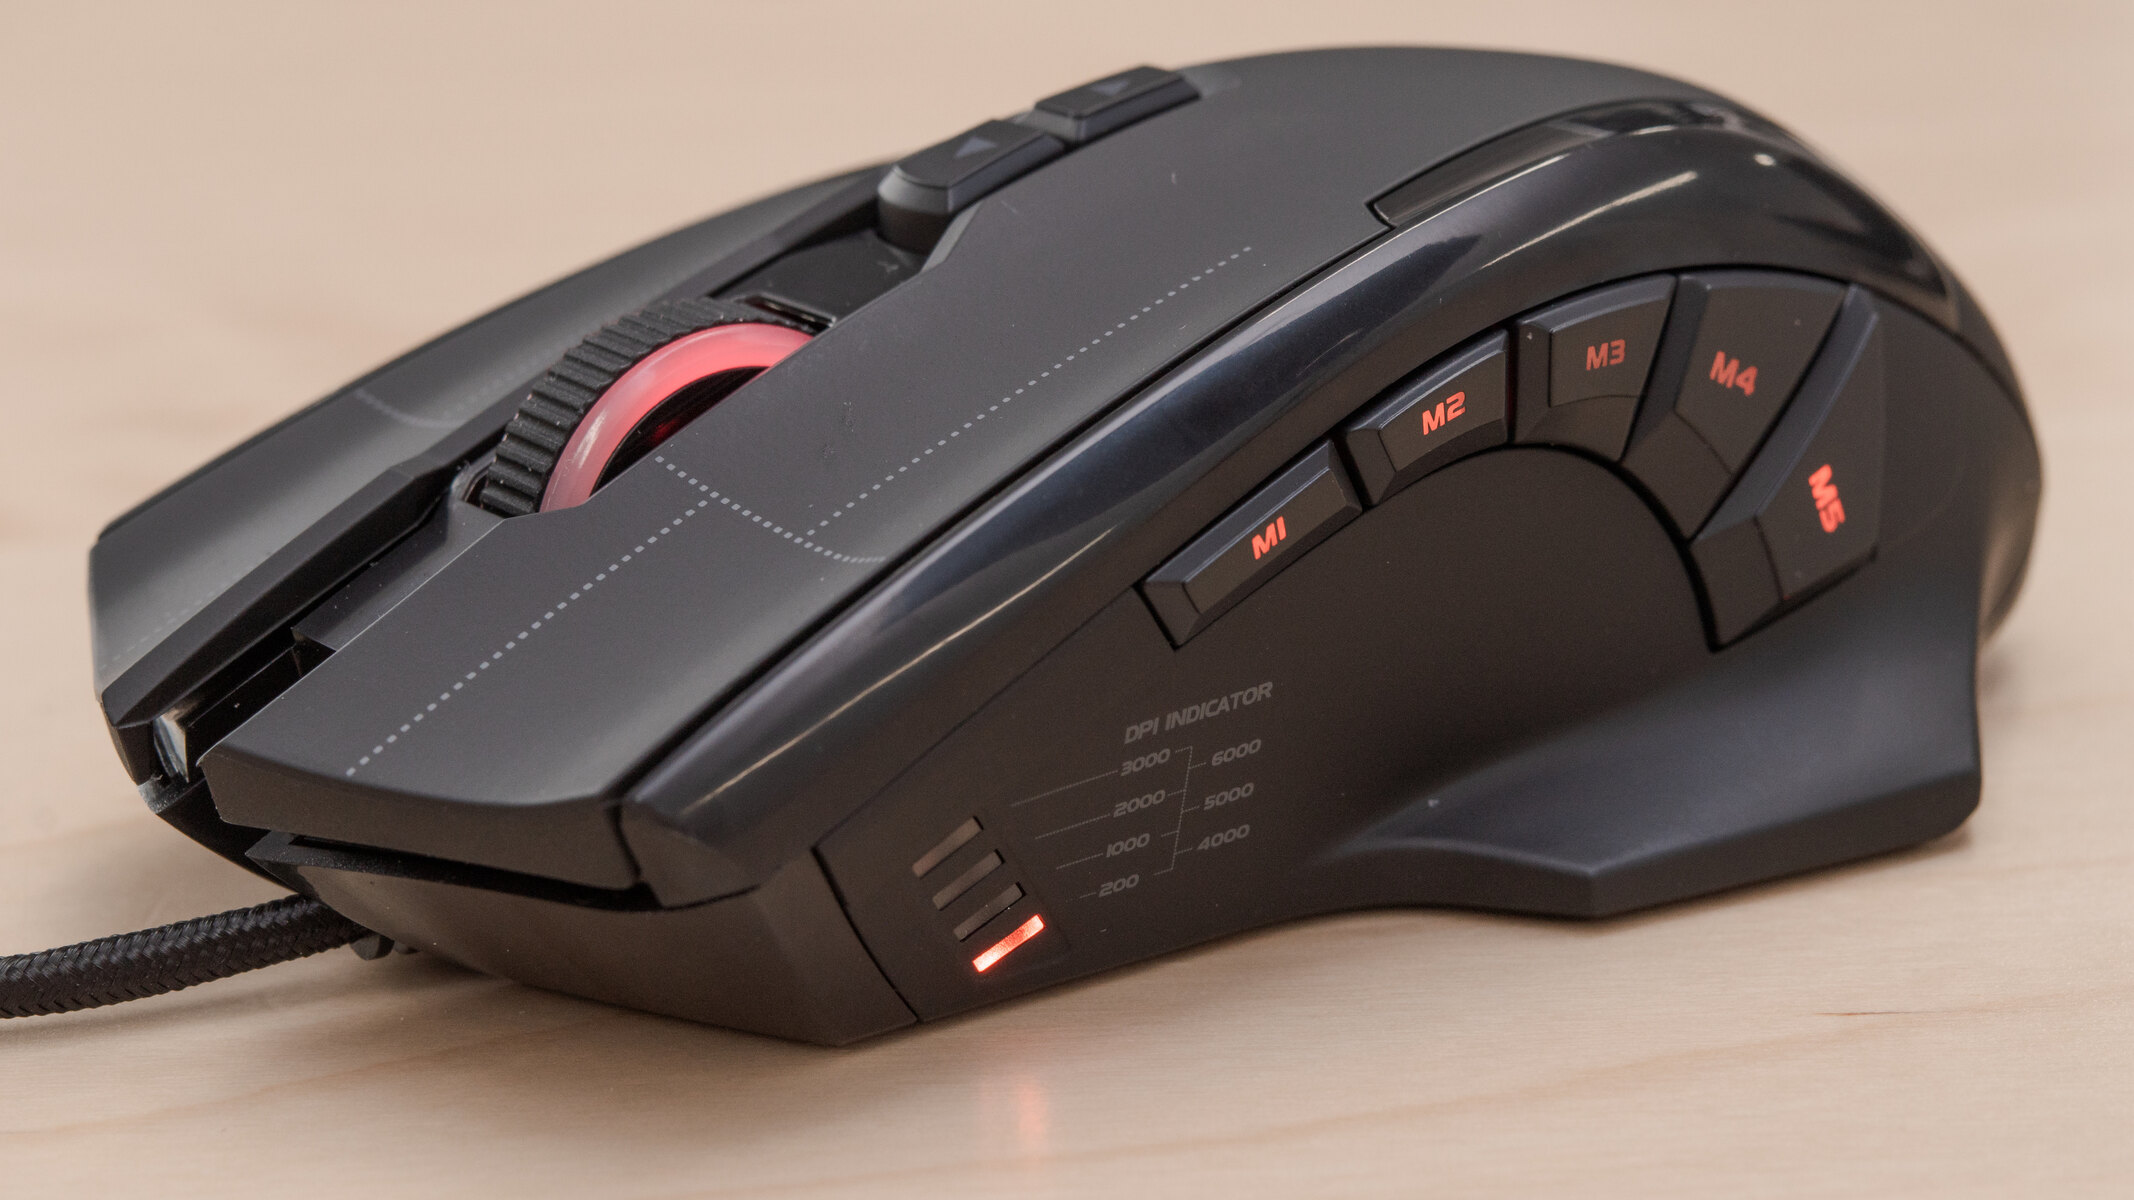 How To Disassemble The Anker Gaming Mouse